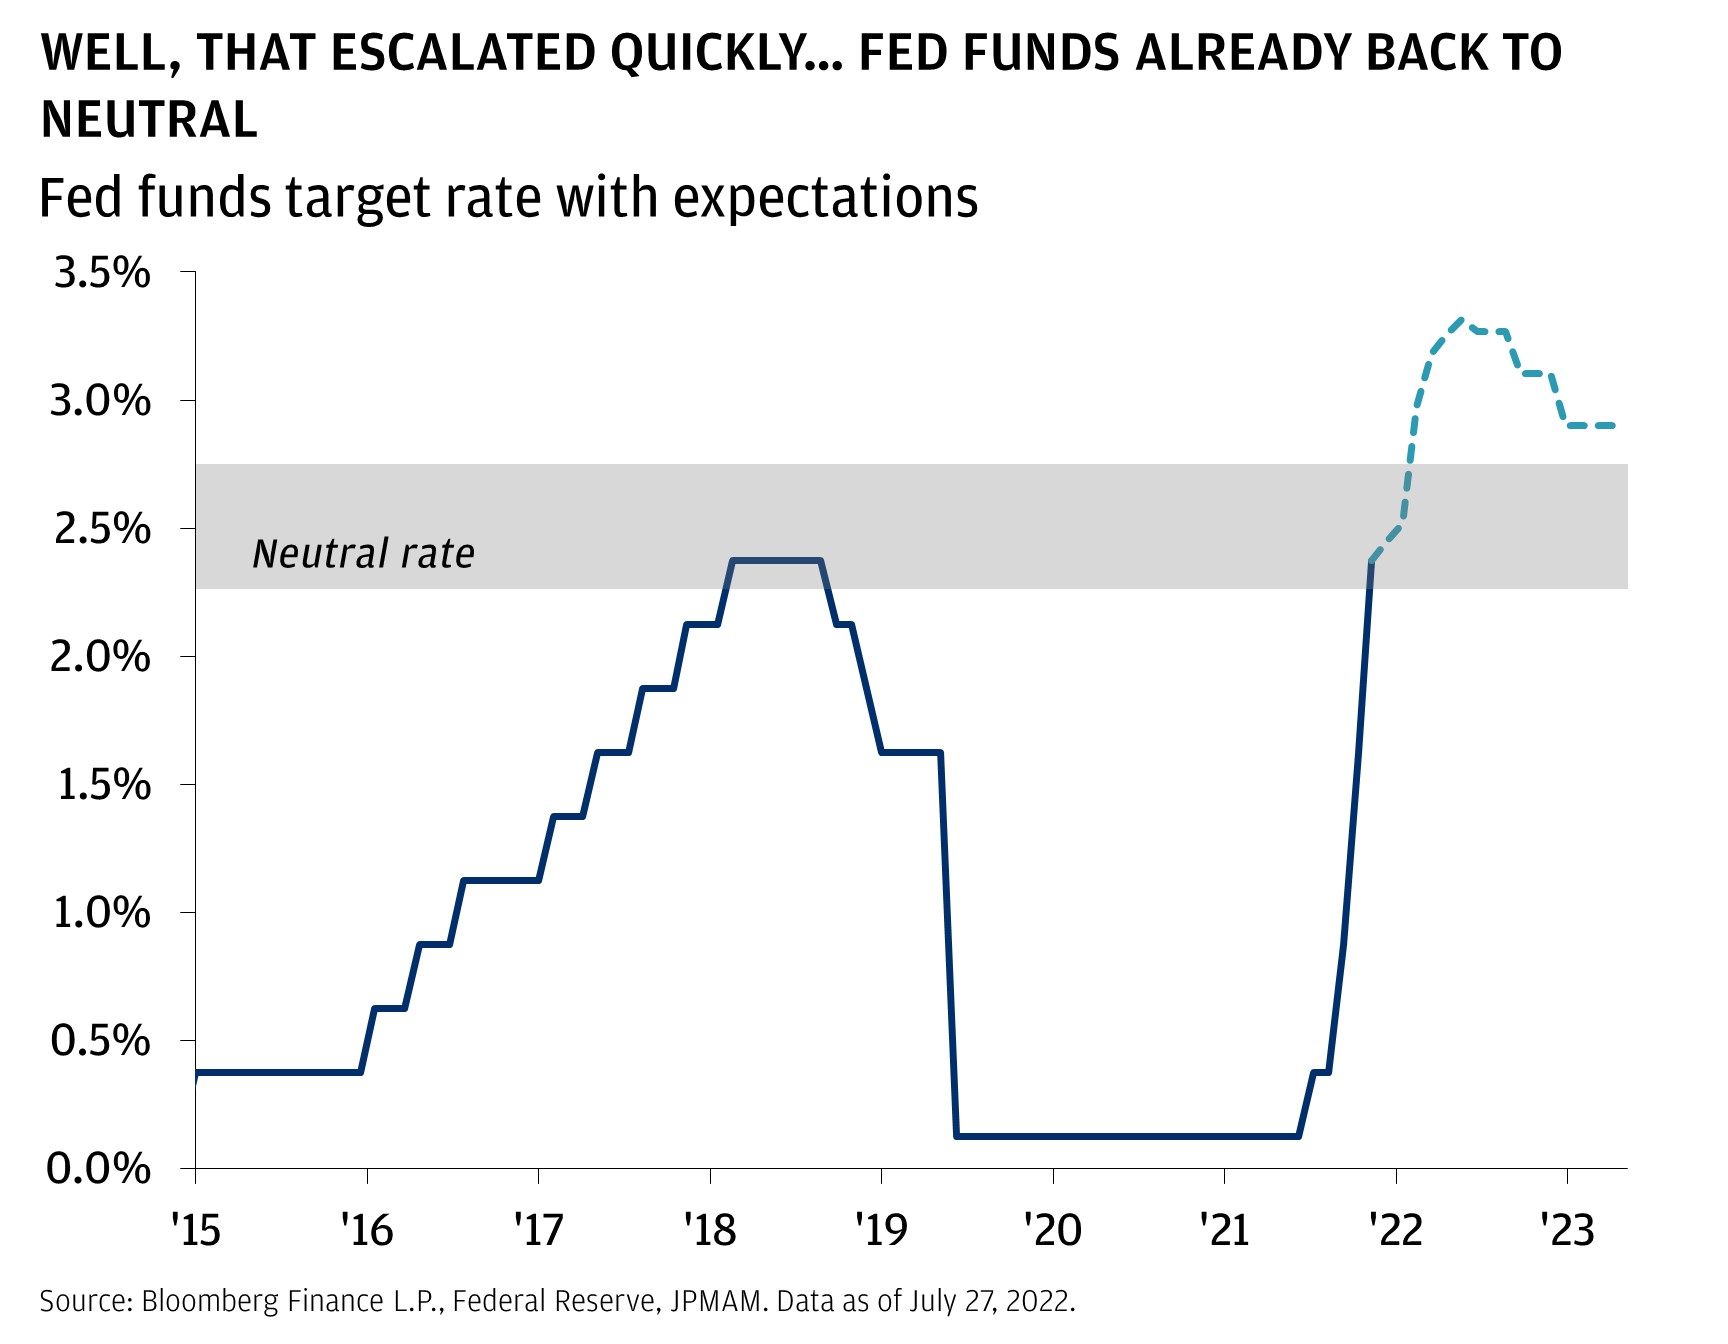 This chart shows the fed funds target rate with expectations, from December 2015 until December 2023.